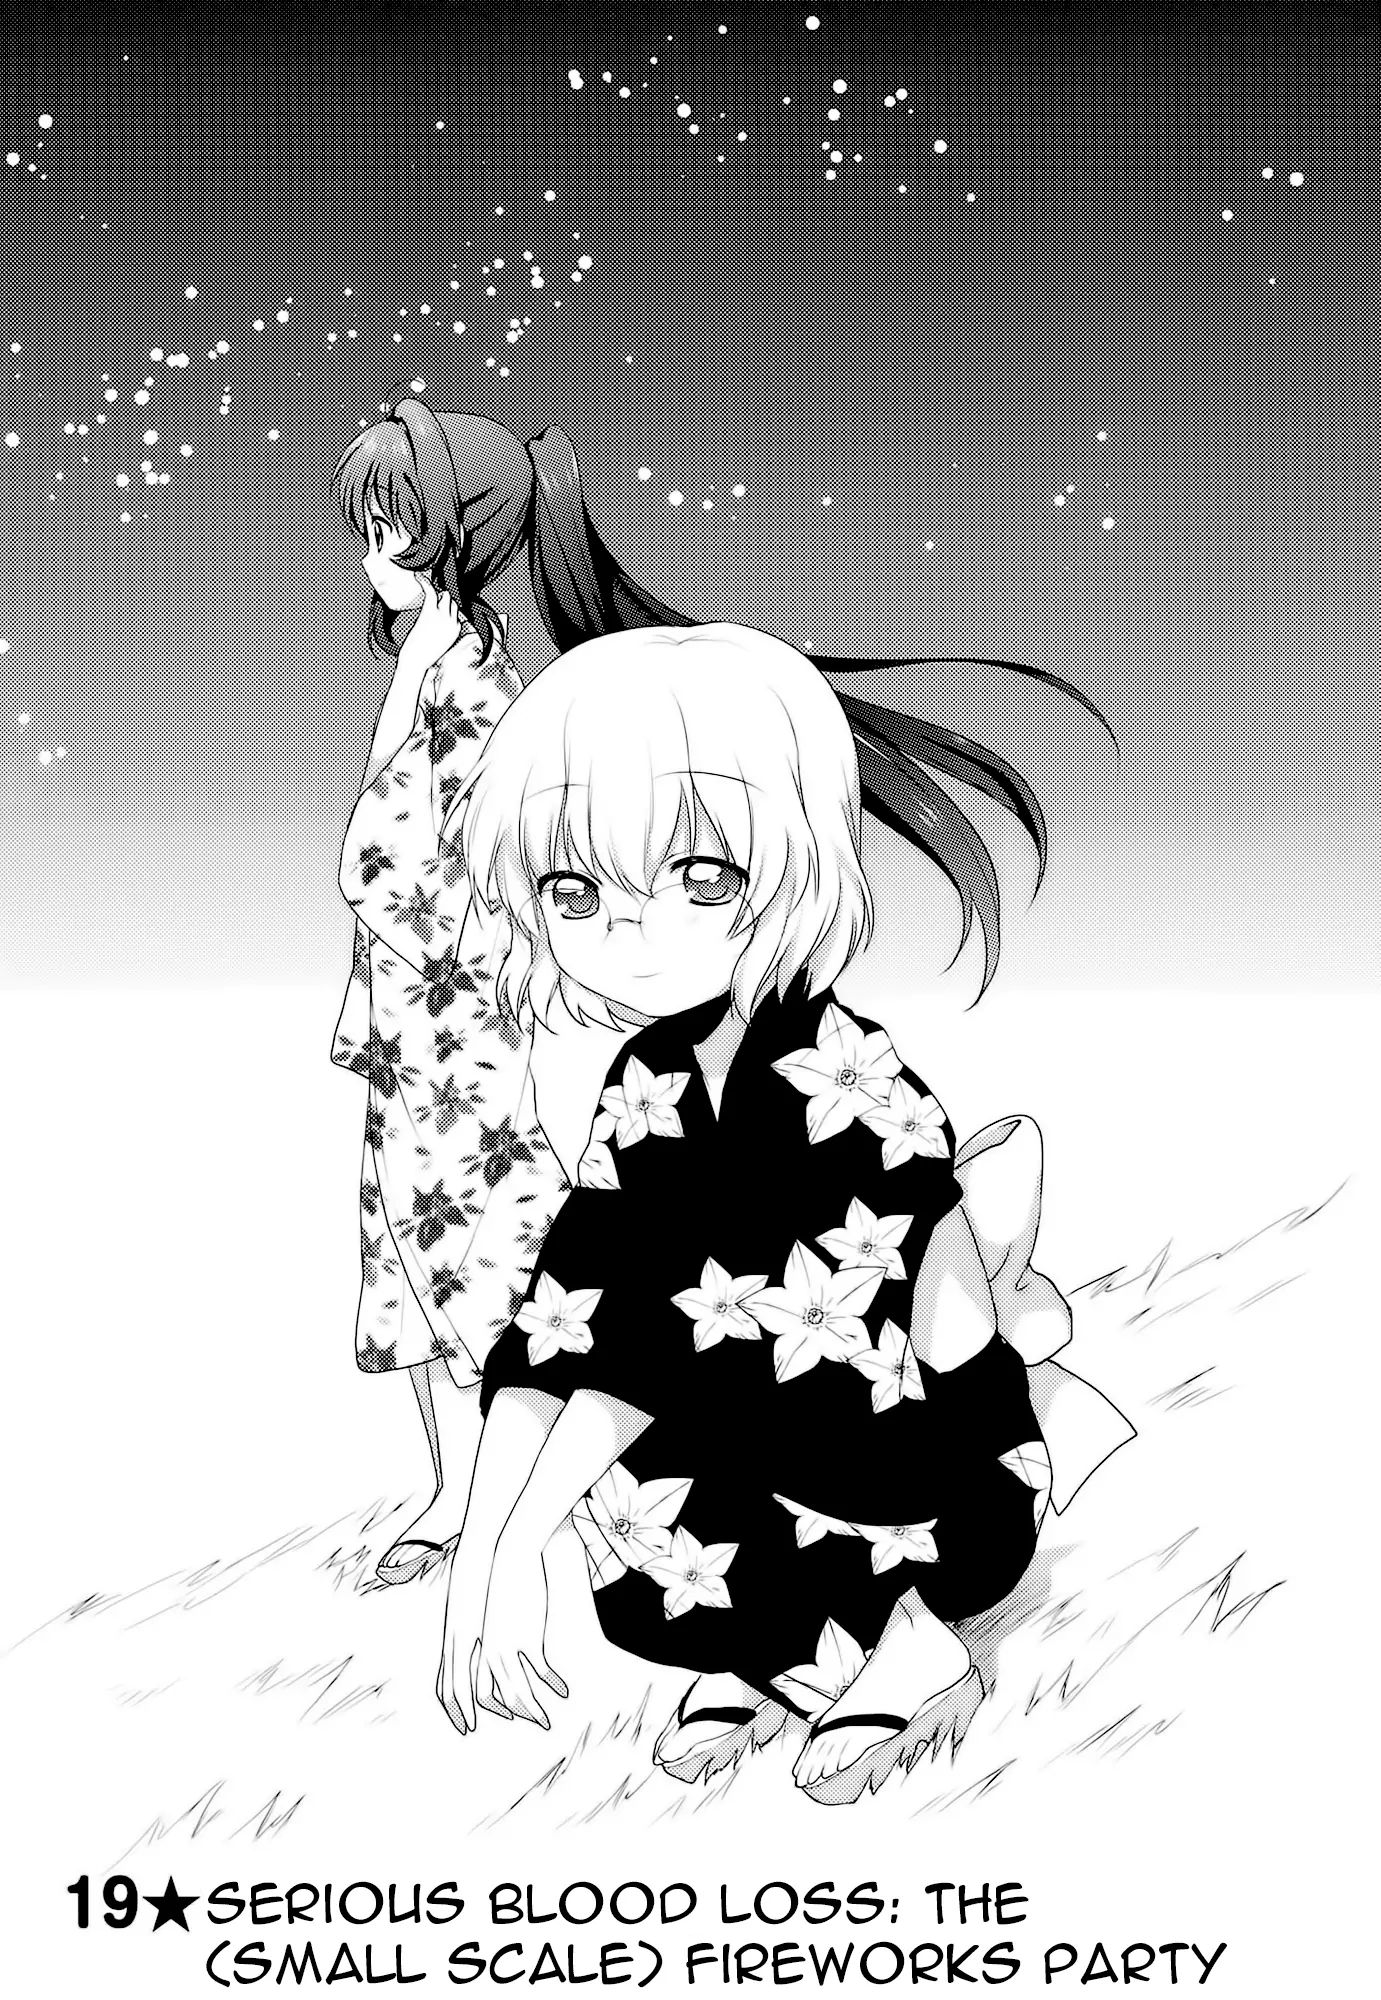 Yuru Yuri Vol.2 Chapter 19: Serious Blood Loss: The (Small Scale) Fireworks Party - Picture 2